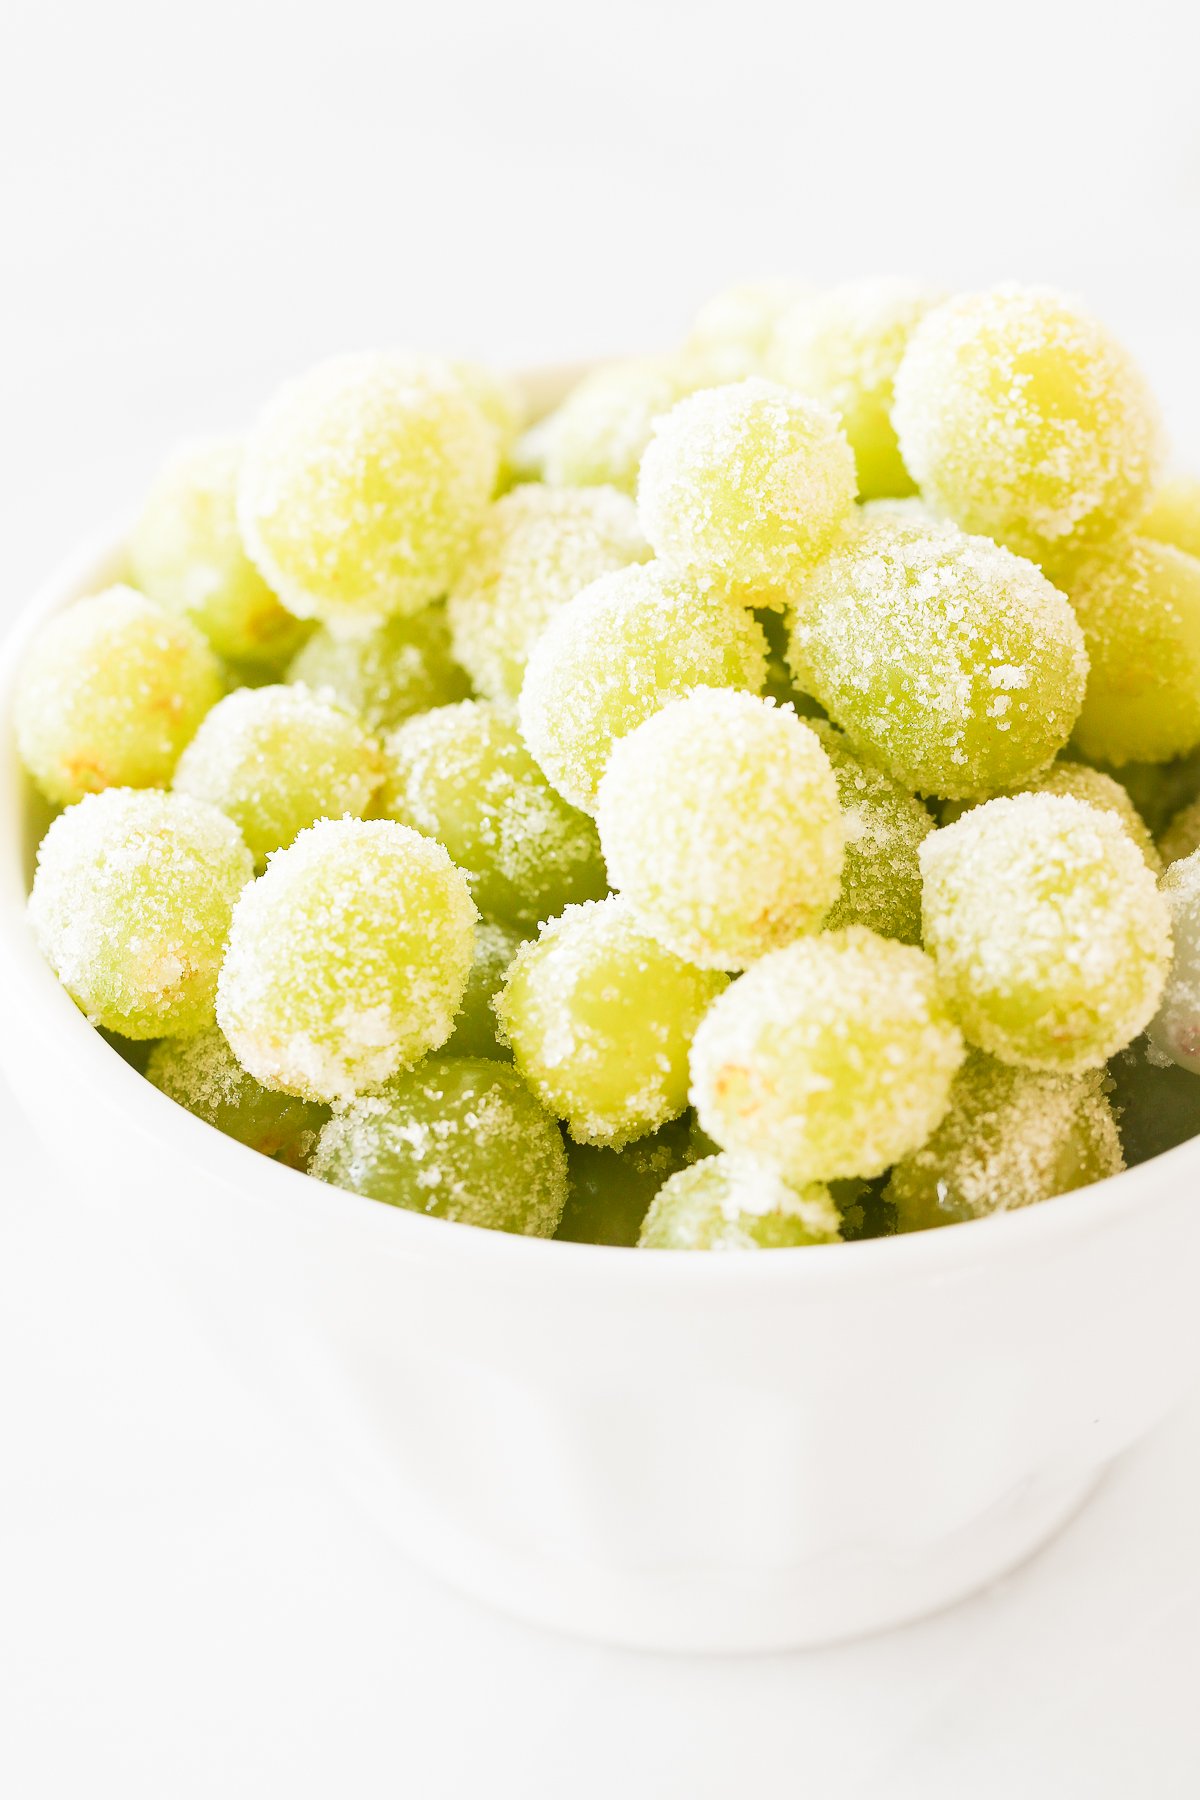 Celebrate with Champagne Grapes! Light, refreshing, poppable grapes are soaked in champagne and rolled in sugar for a delightfully bubbly bite!

They're delicious bite-sized treats, perfect for parties, picnics, patios, poolside, New Year's Eve and so much more!